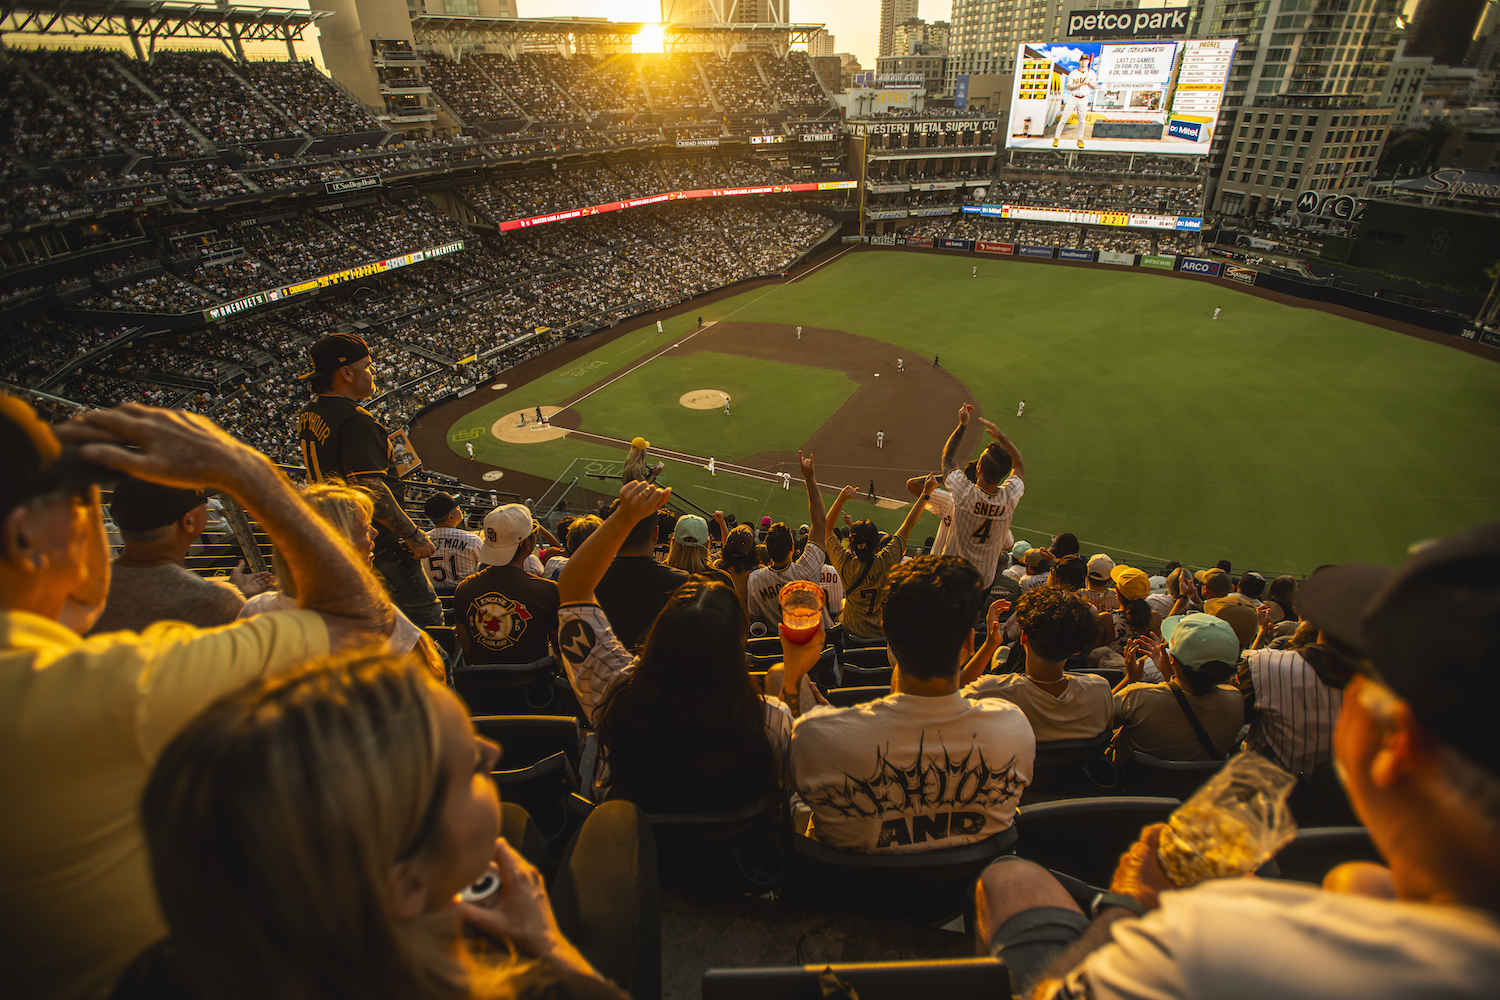 A view of Petco Park as the sun sets during a San Diego Padres vs Miami Marlins game